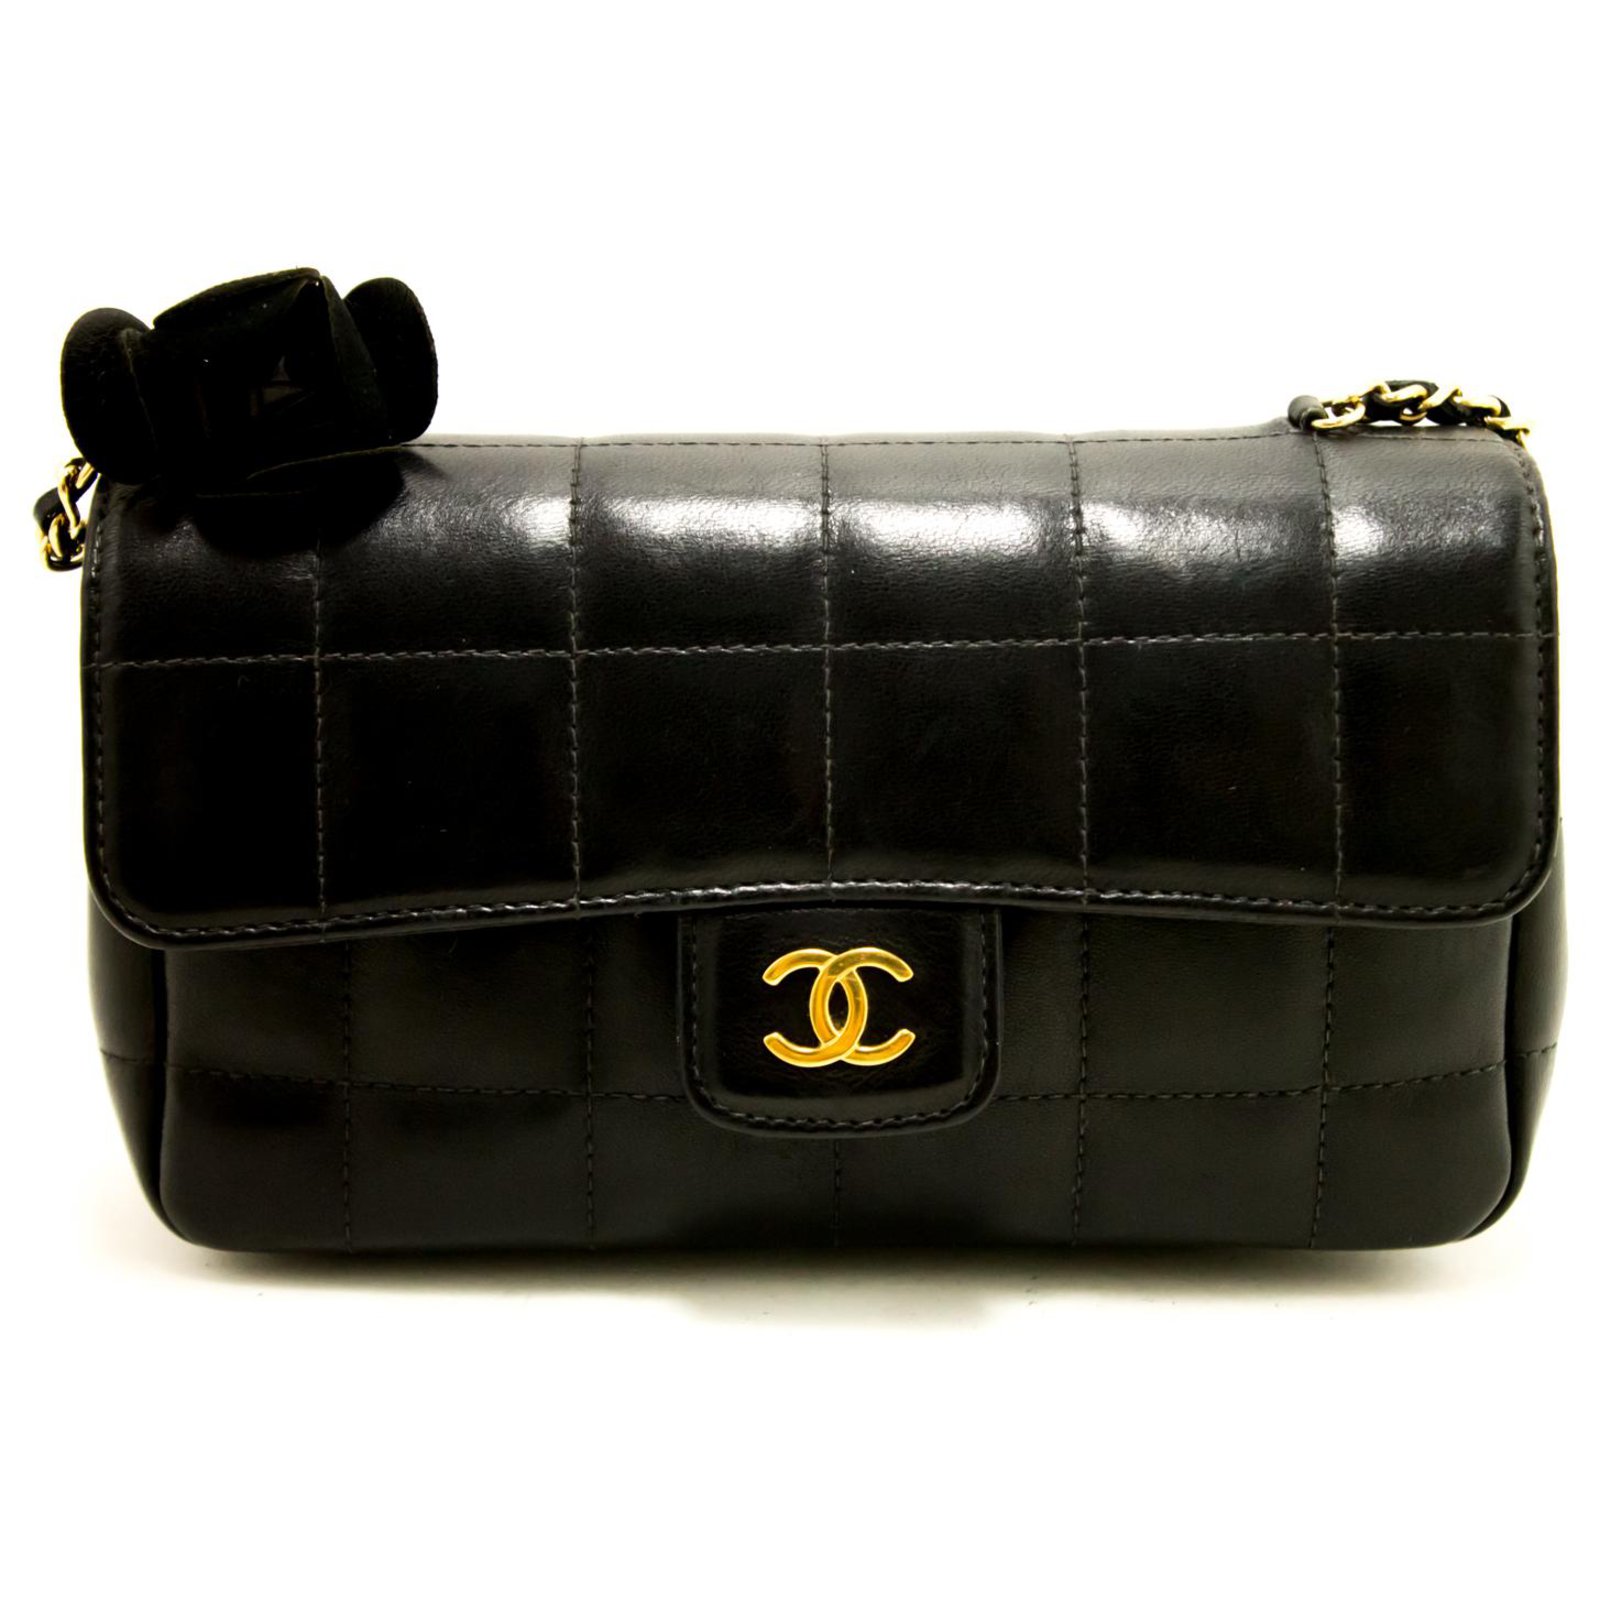 leather chanel deauville bag